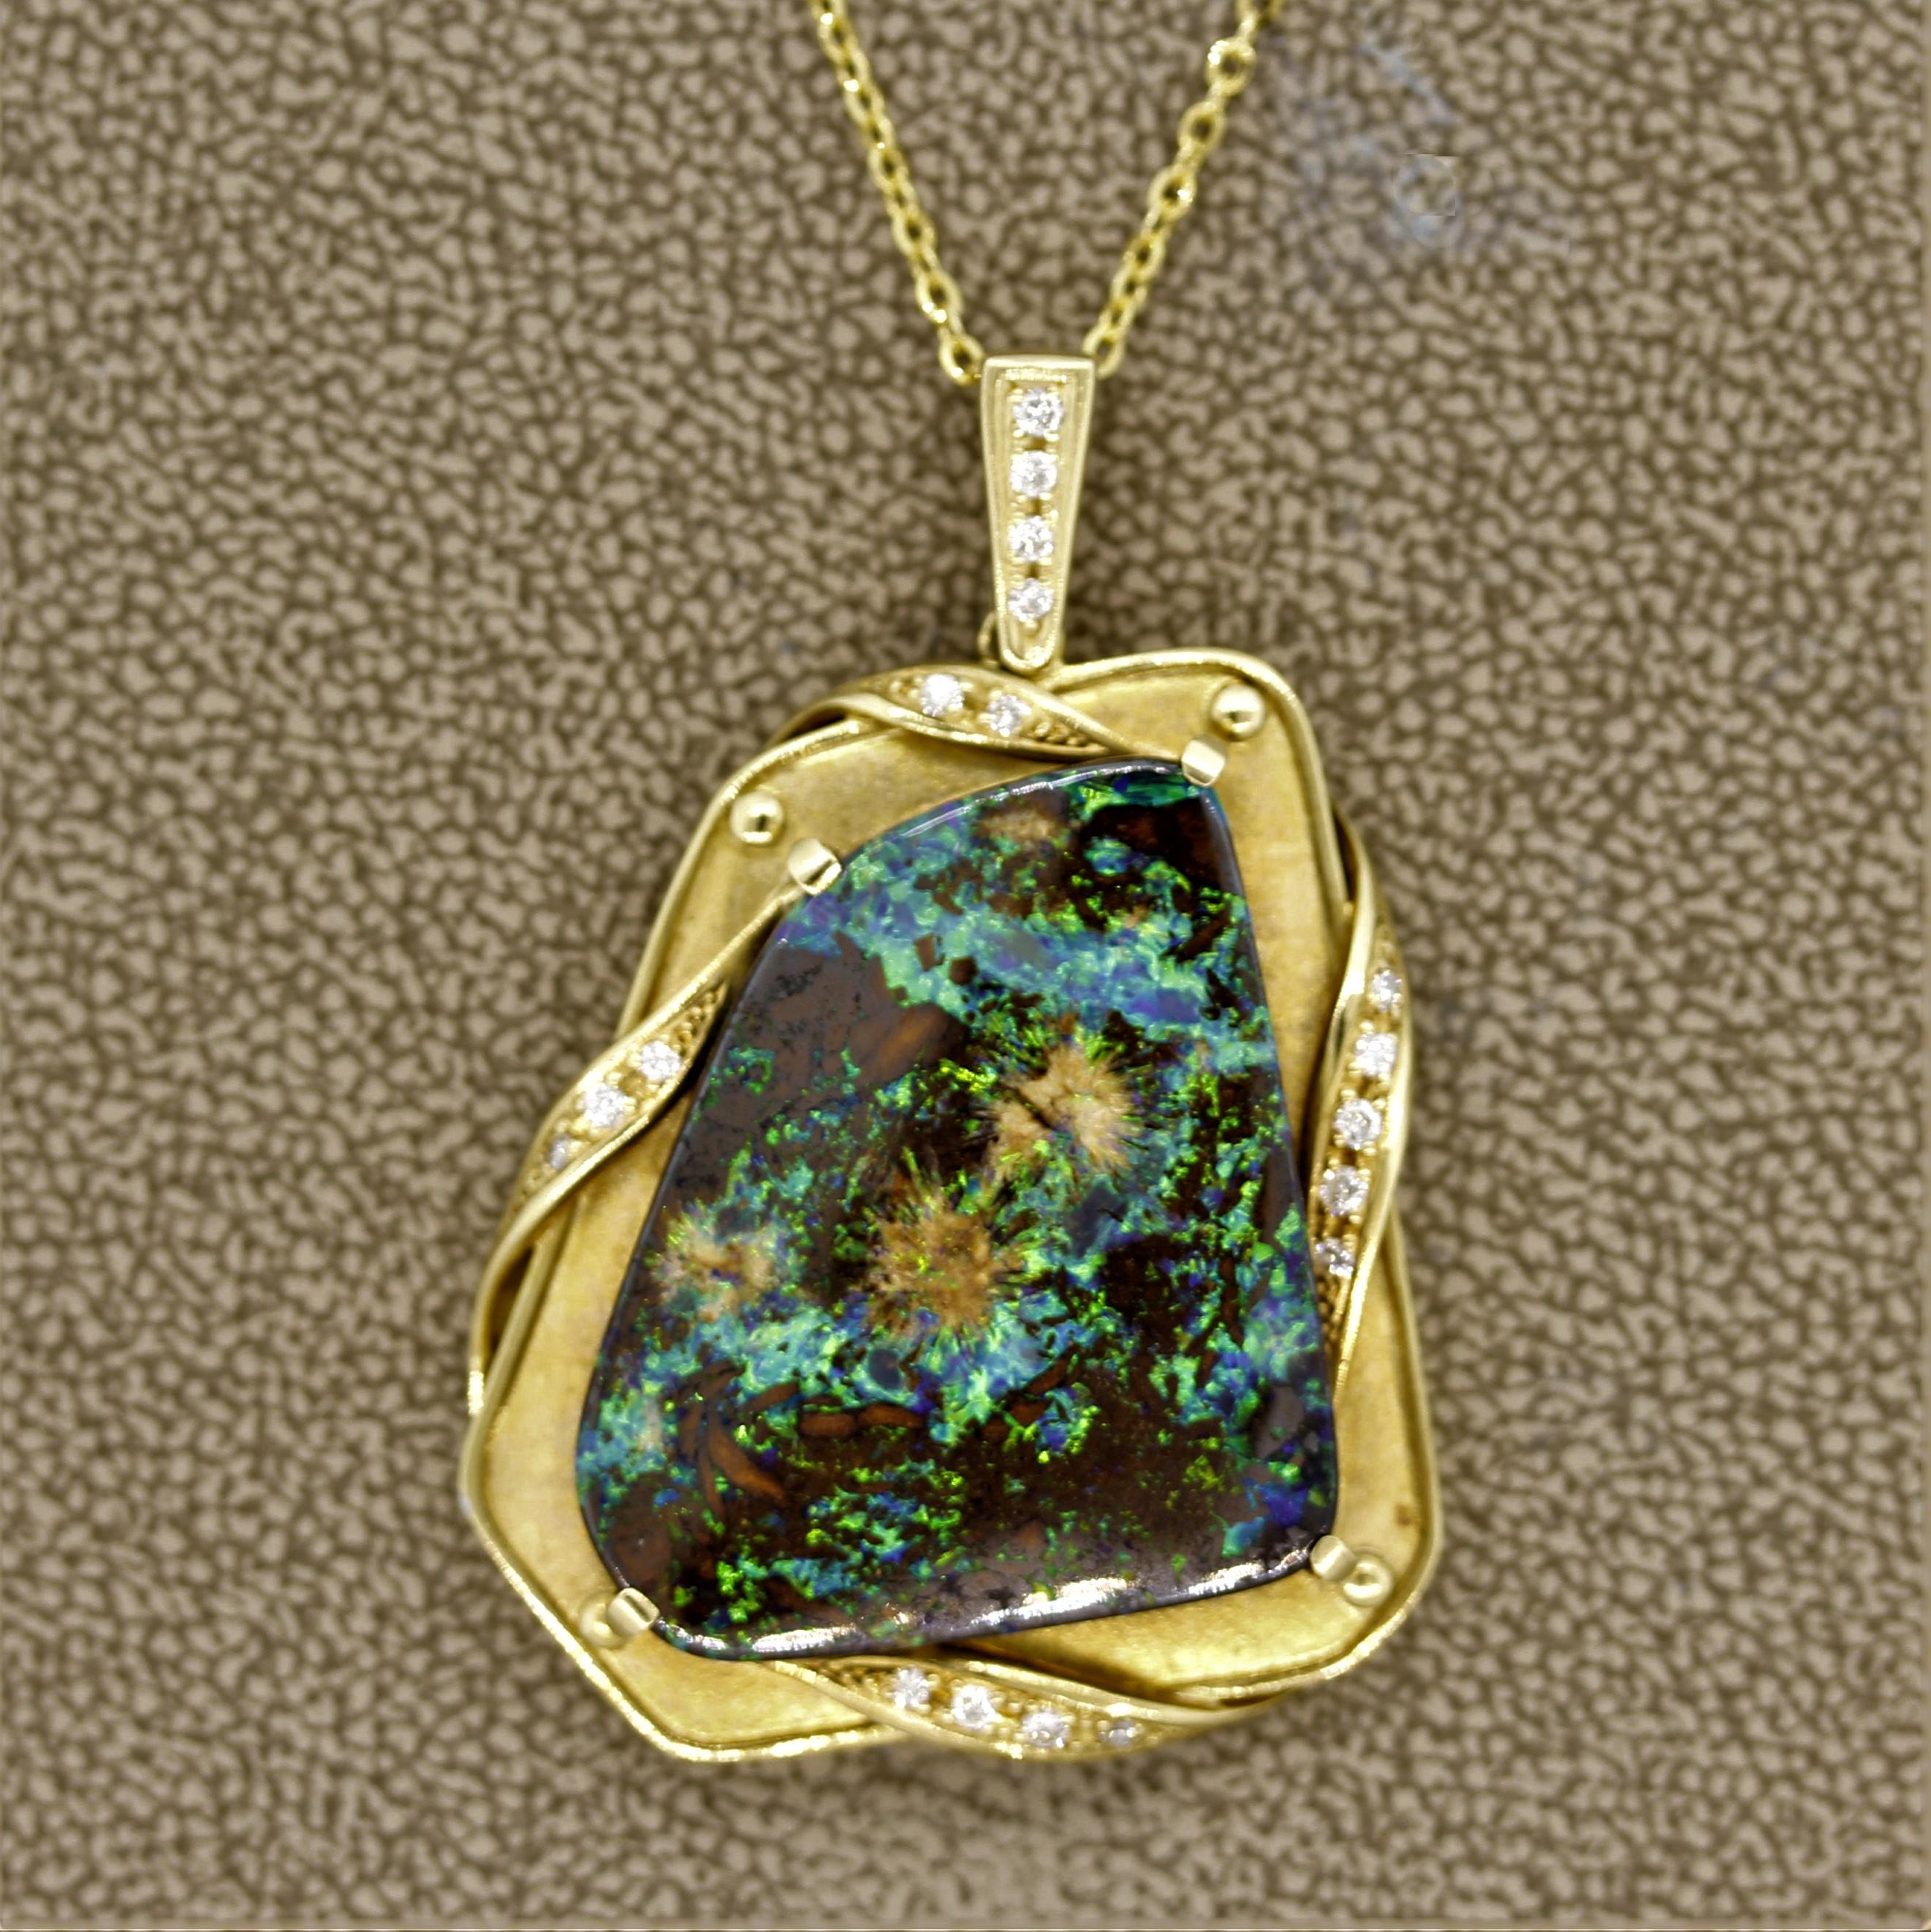 A luxurious pendant featuring a large Australian boulder opal weighing 27.92 carats. It has great play of color with strong flashes of green and blue across the opal. The pendant is accented by 0.22 carats of round brilliant cut diamonds set in a